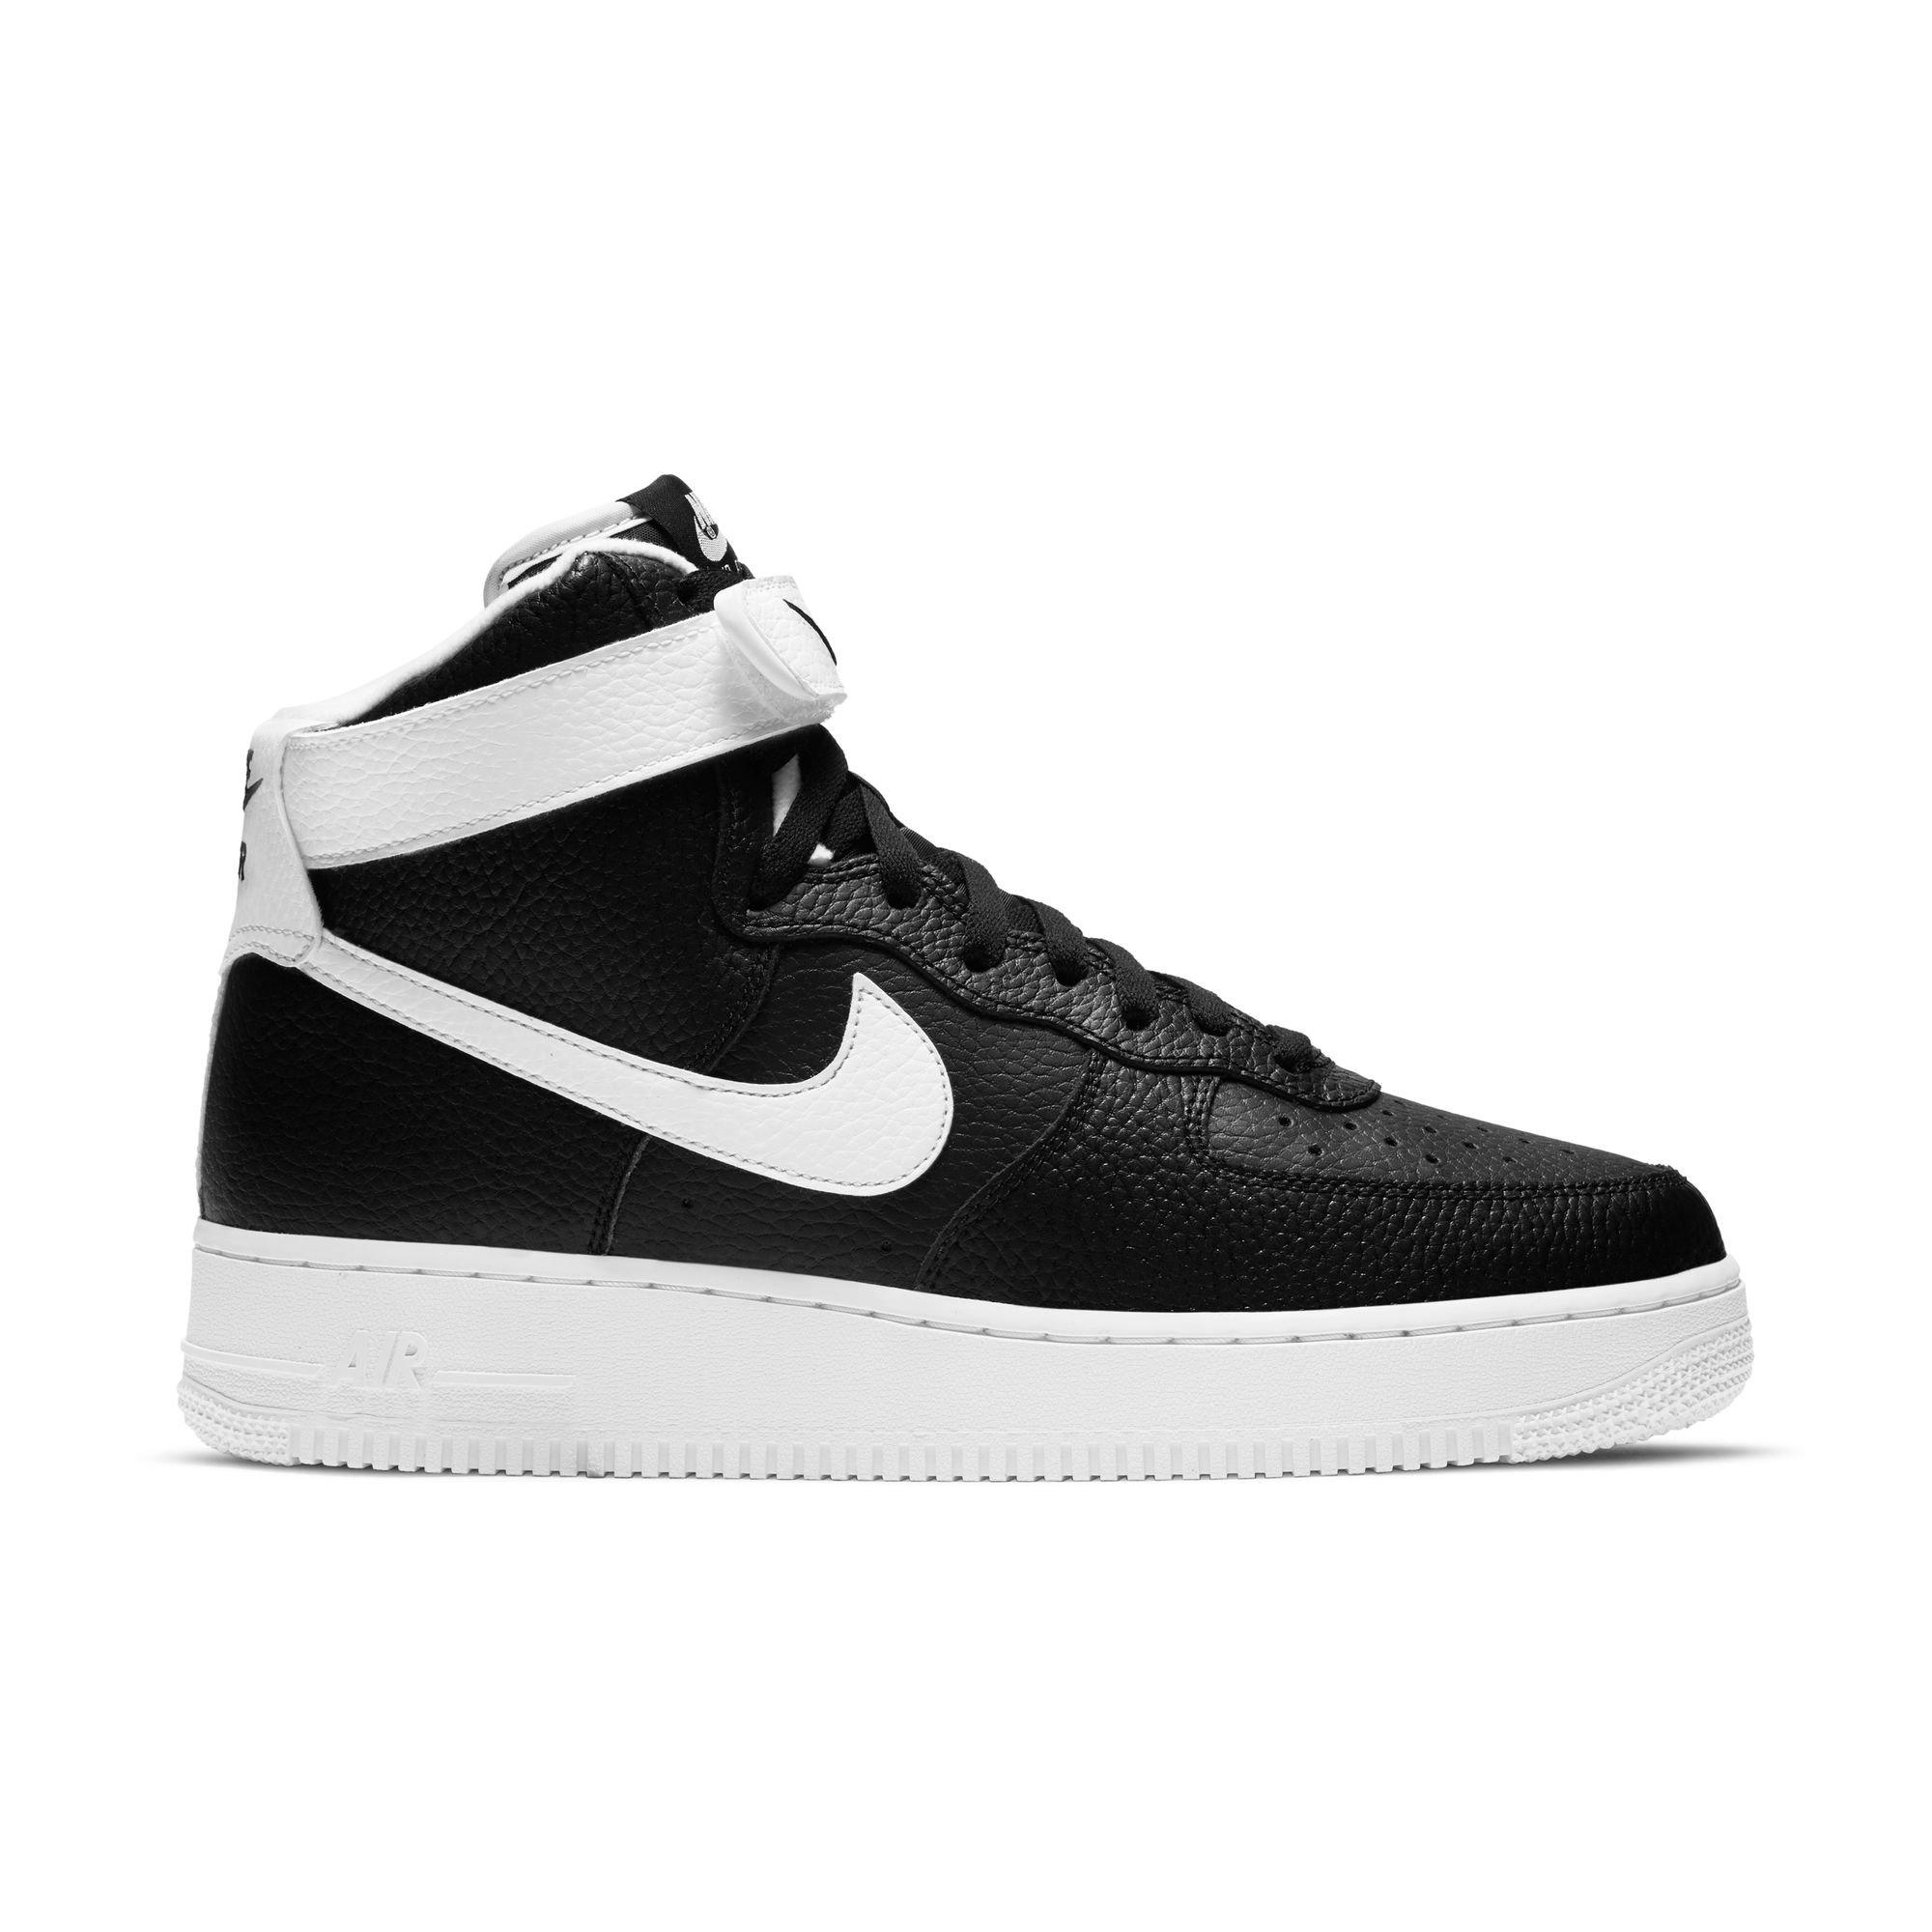 Nike Air Force 1 Mid Bred - SIZE 9.5 PRE-OWNED